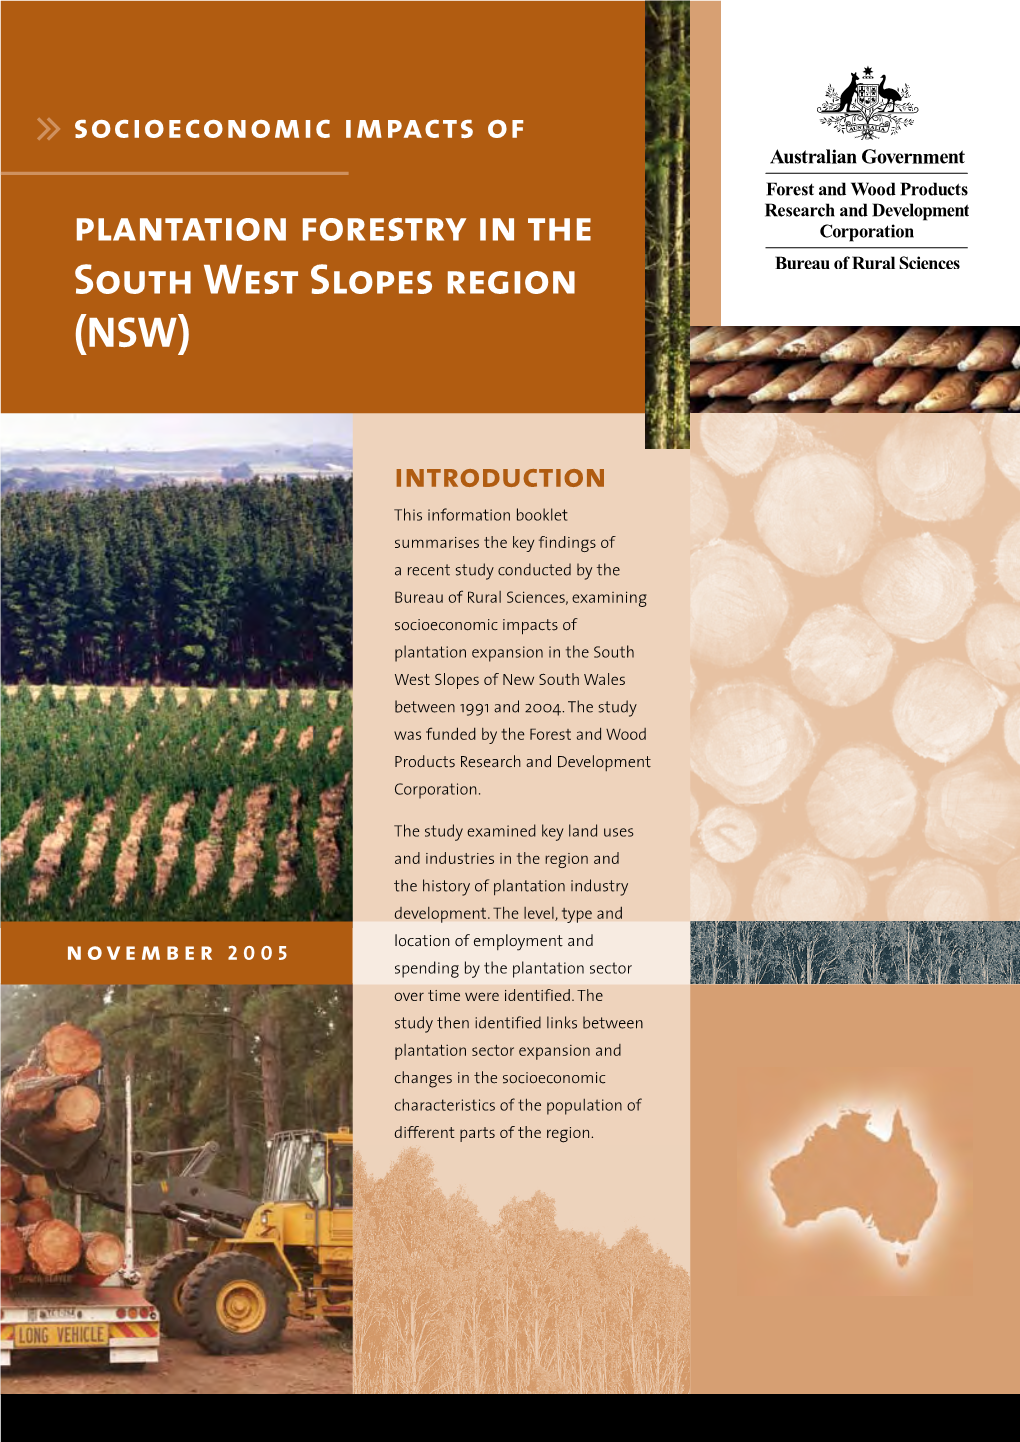 Plantation Forestry in the South West Slopes Region (NSW)